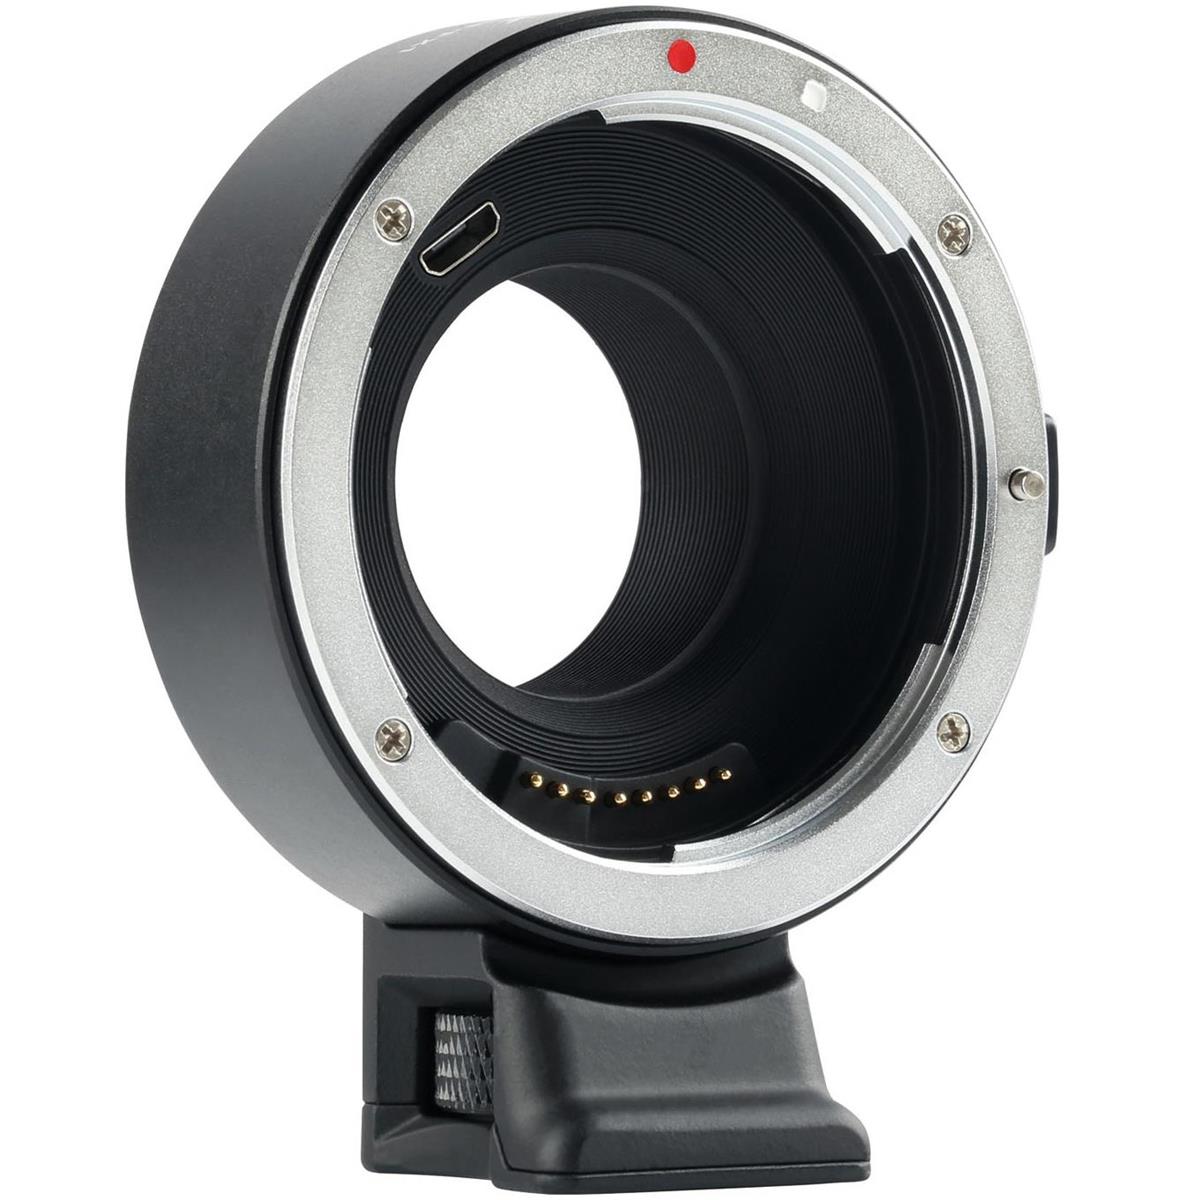 Image of Viltrox EF-FX1 LMA for Canon EF or EF-S-Mount Lens to FUJIFILM X-Mount Camera